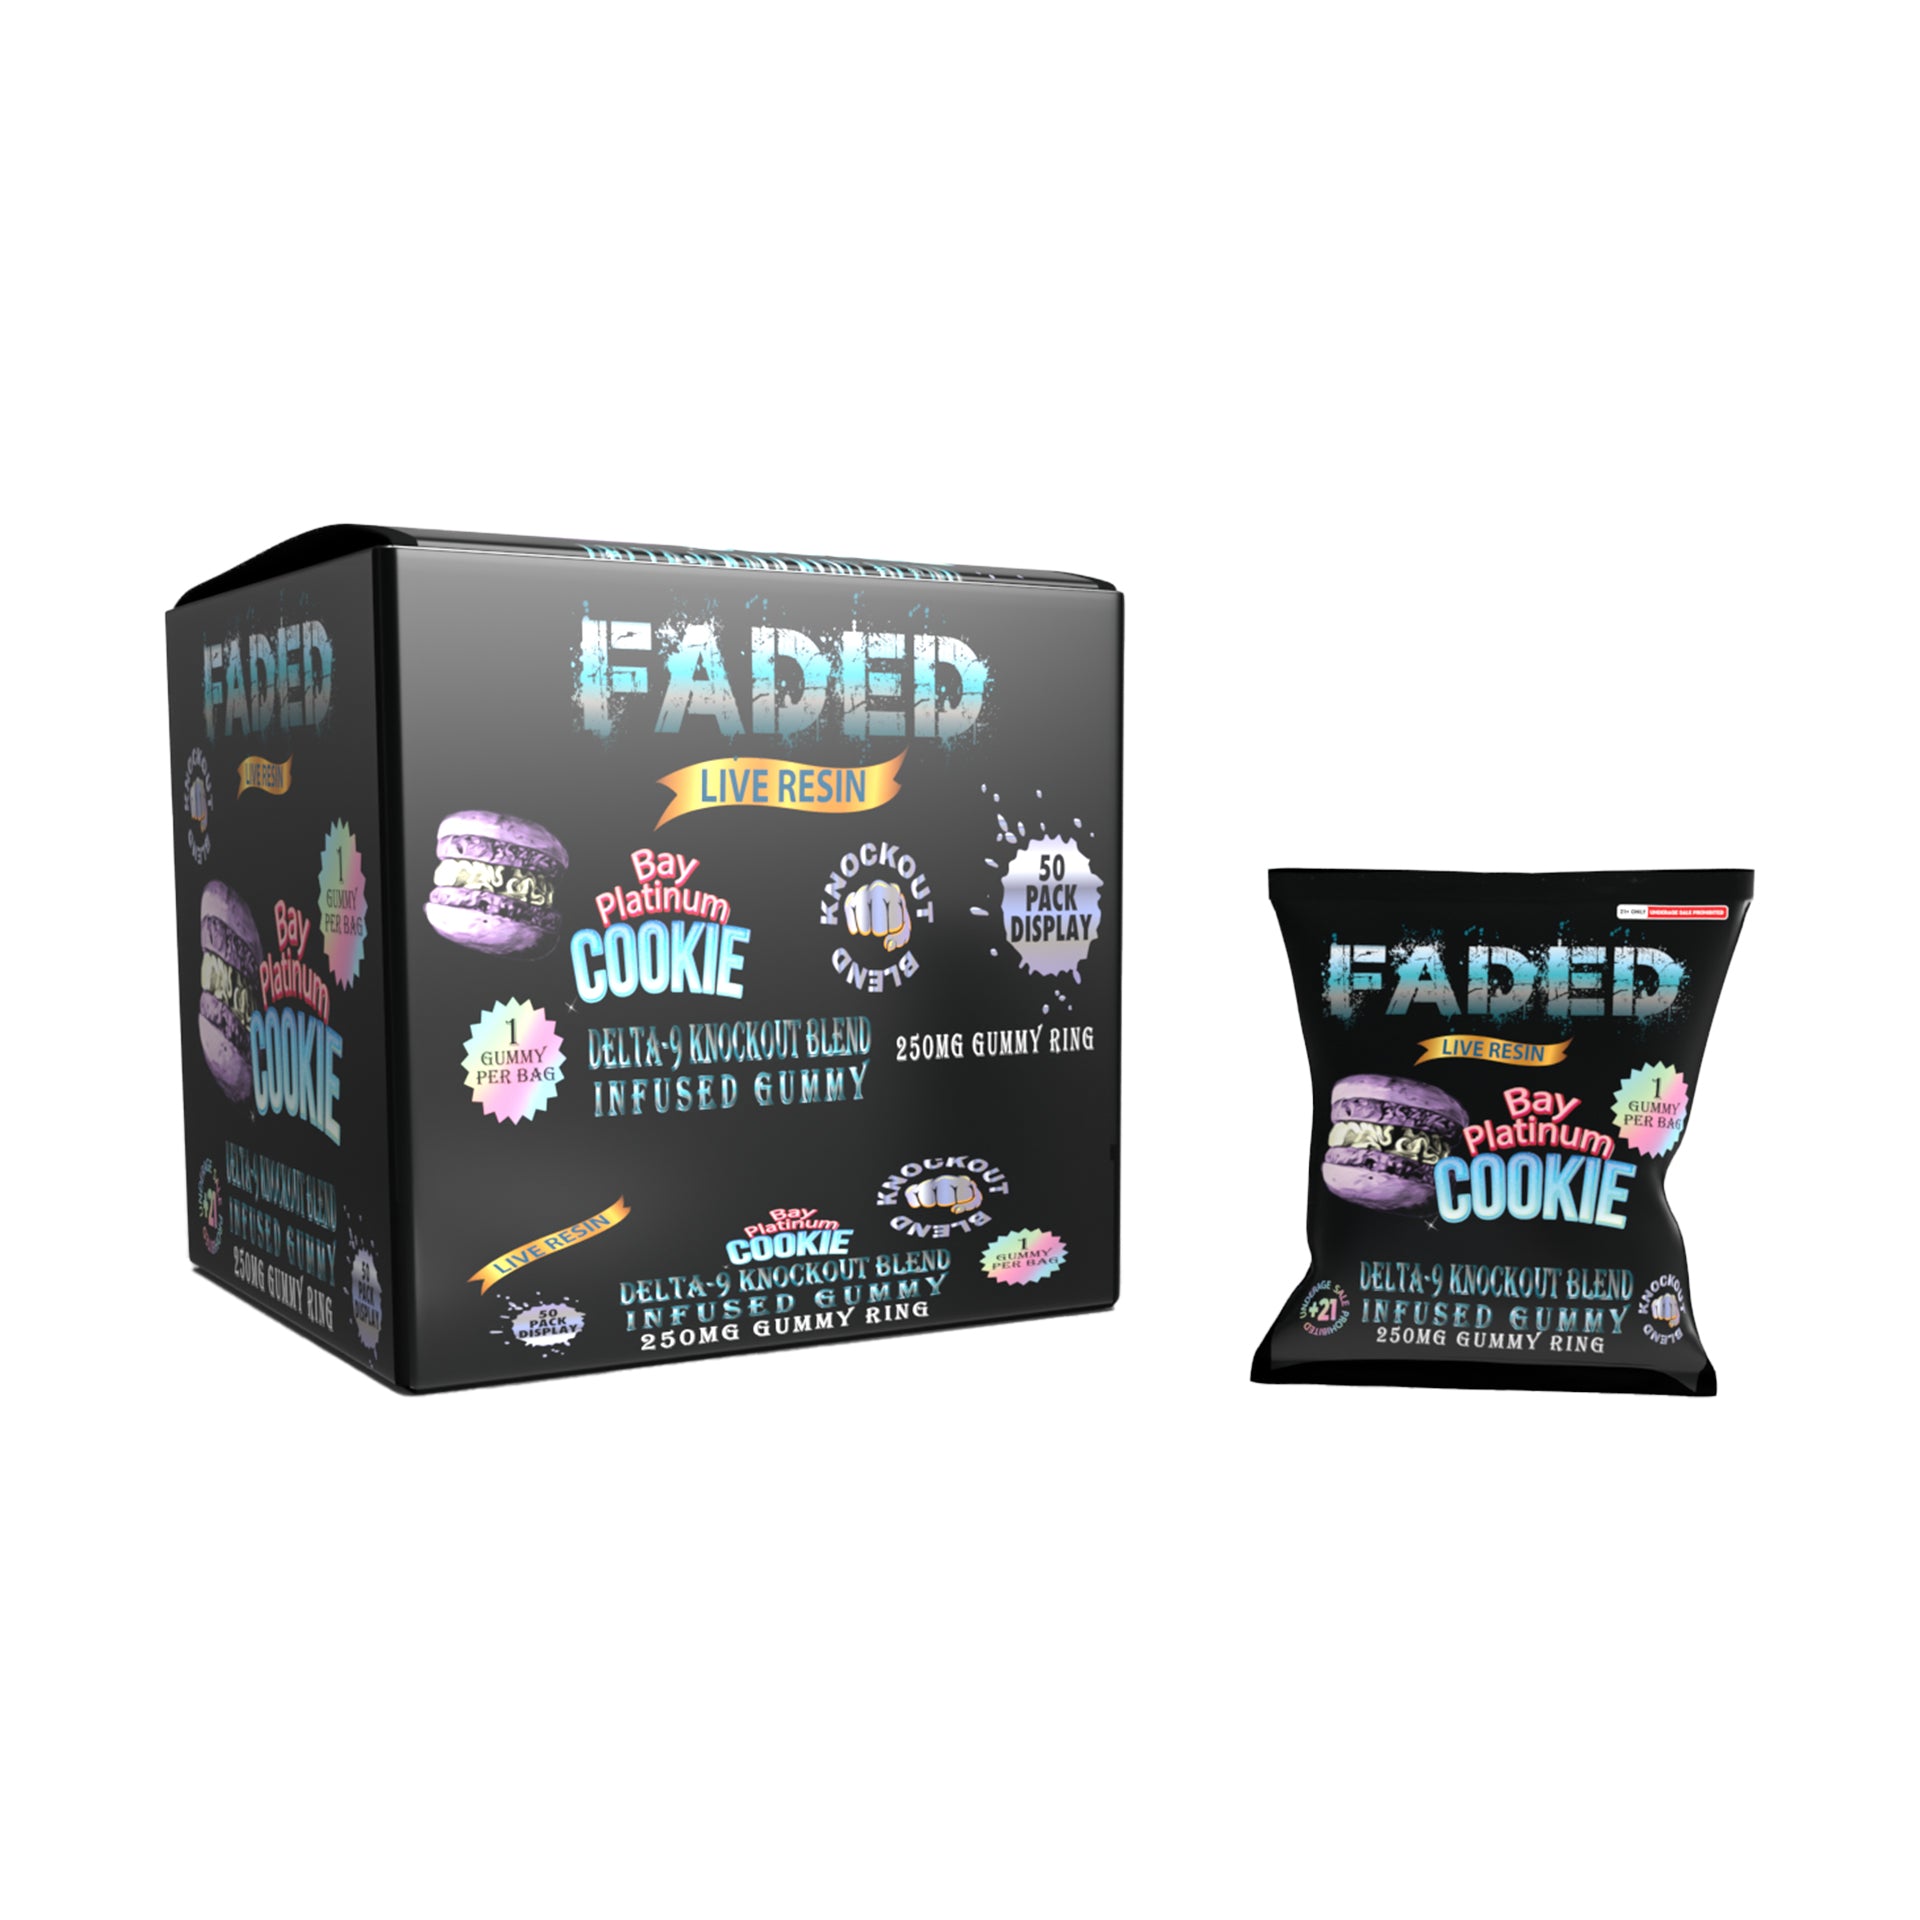 FADED DELTA - 9 KNOCKOUT BLEND BAY PLATINUM COOKIE 1CT GUMMY RING 250MG